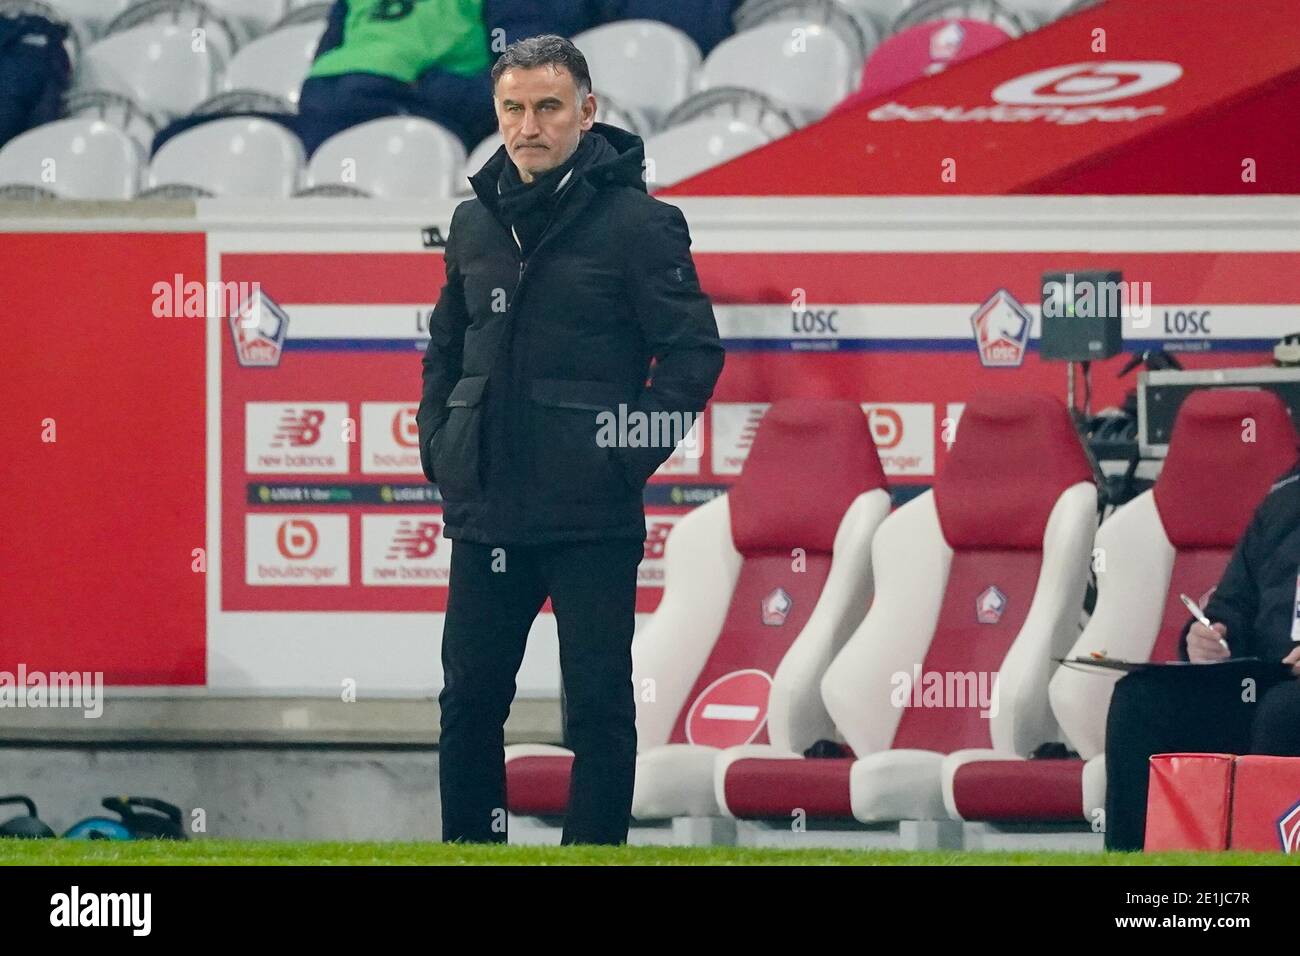 LILLE, FRANCE - JANUARY 6: Christophe Galtier of Lille OSC during the Ligue 1 match between Lille OSC and Angers SCO at Stade Pierre Mauroy on January Stock Photo